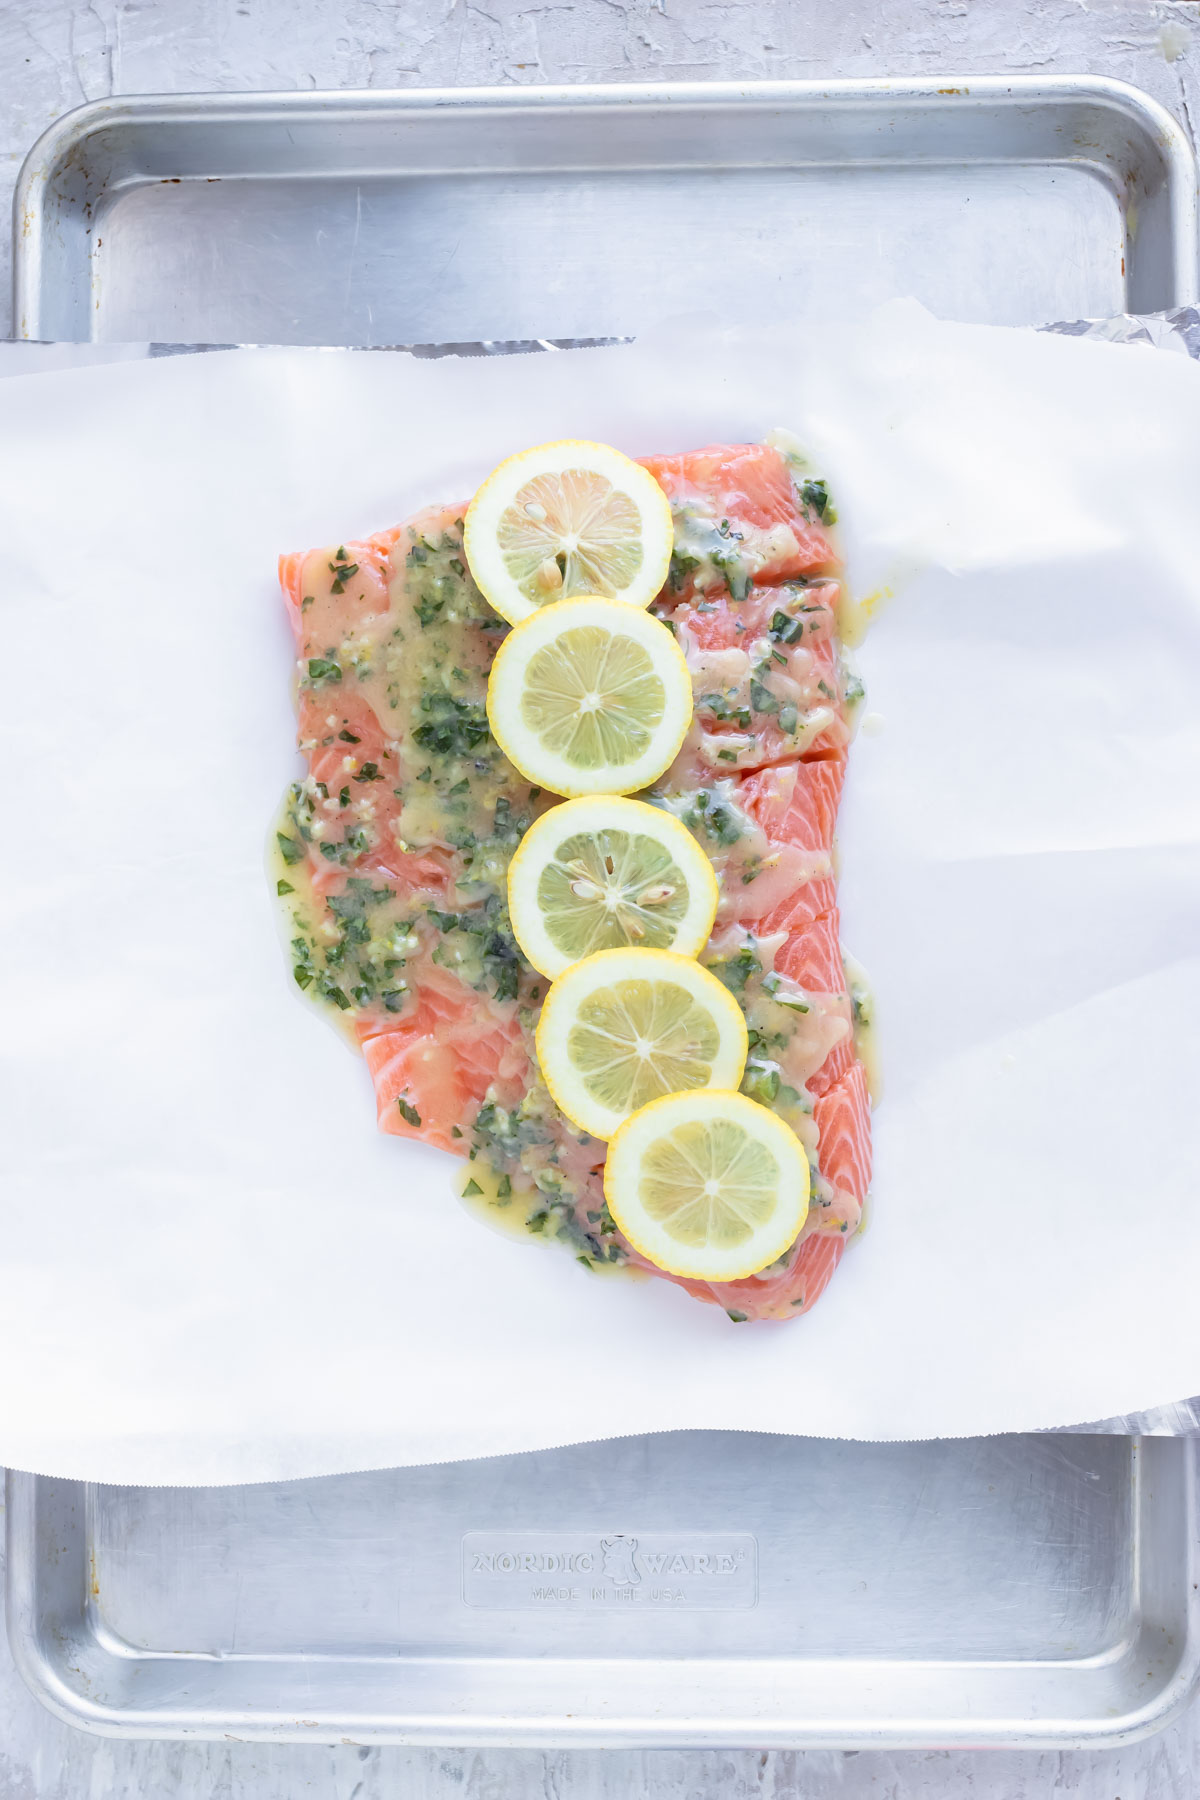 Lemon slices on top of fish on a baking sheet.